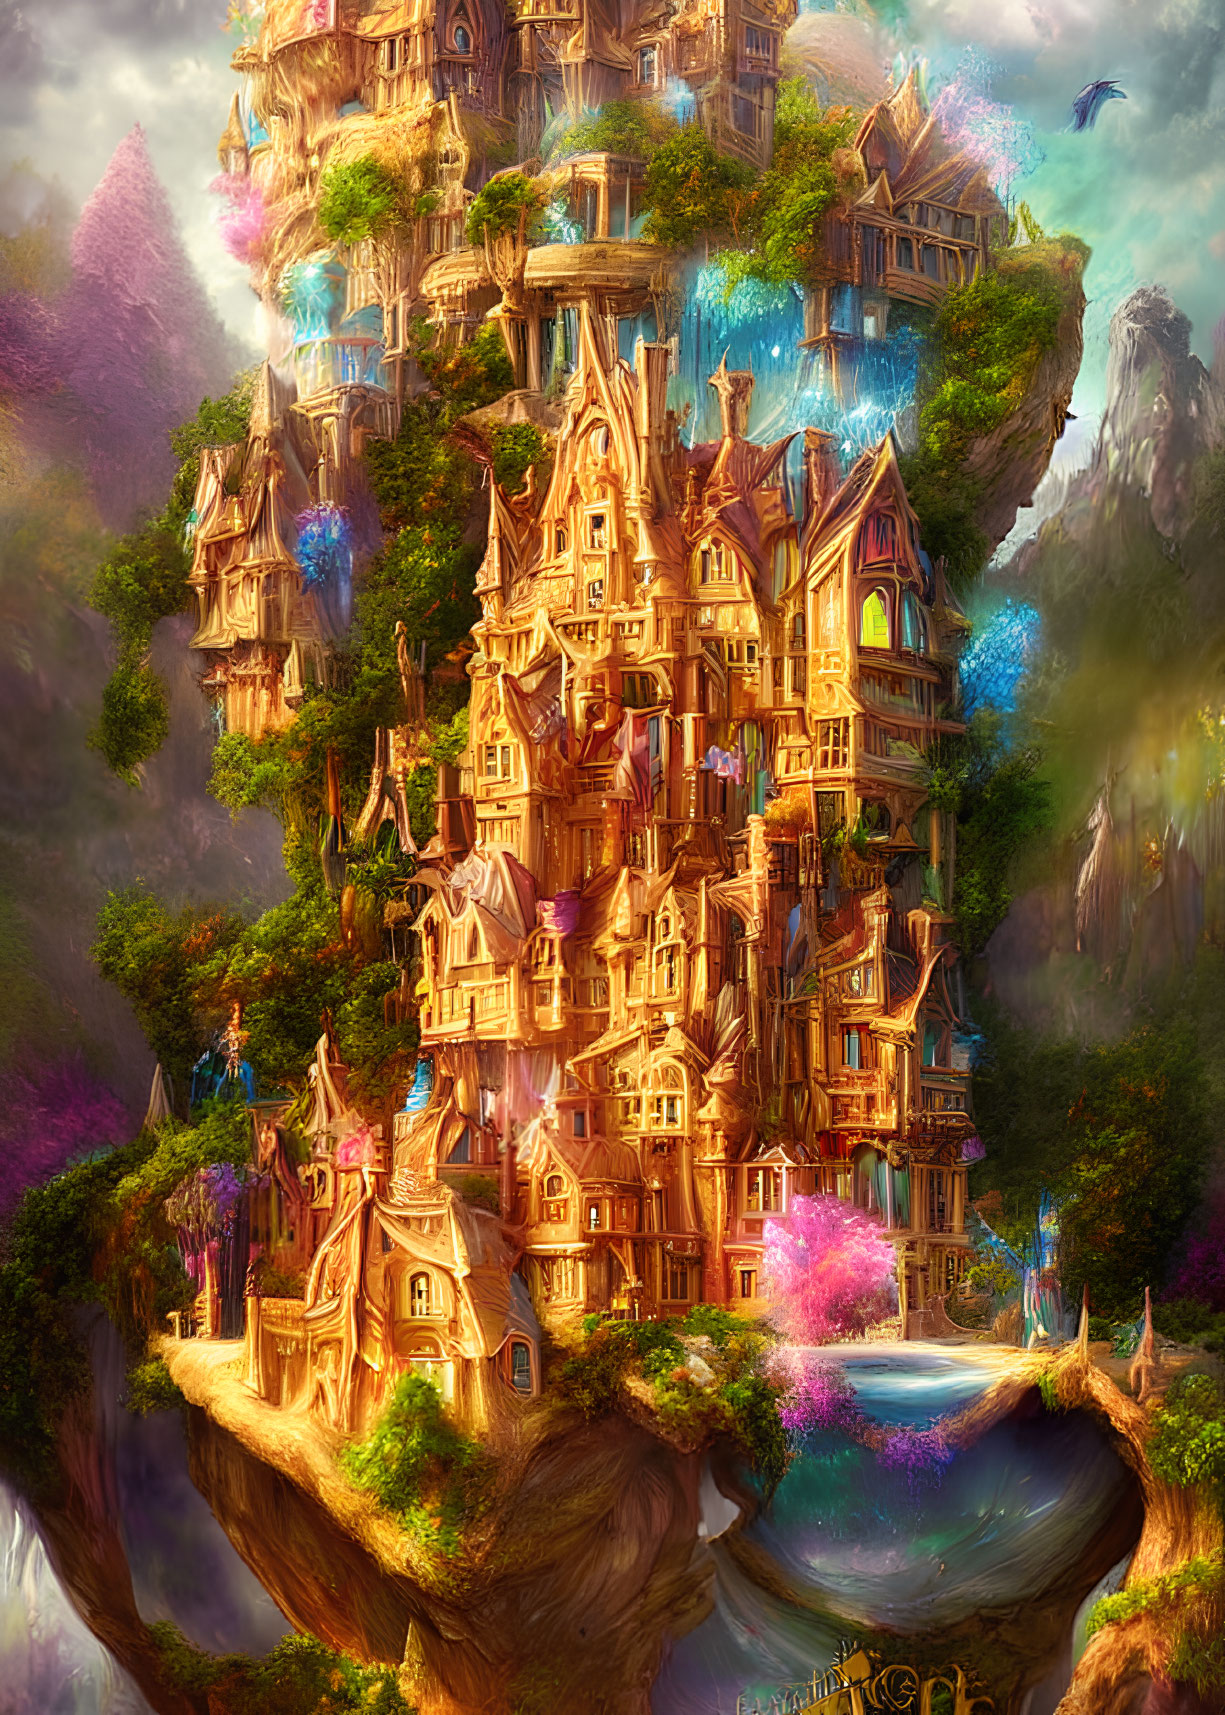 Towering tree with whimsical houses in lush greenery and mystical surroundings